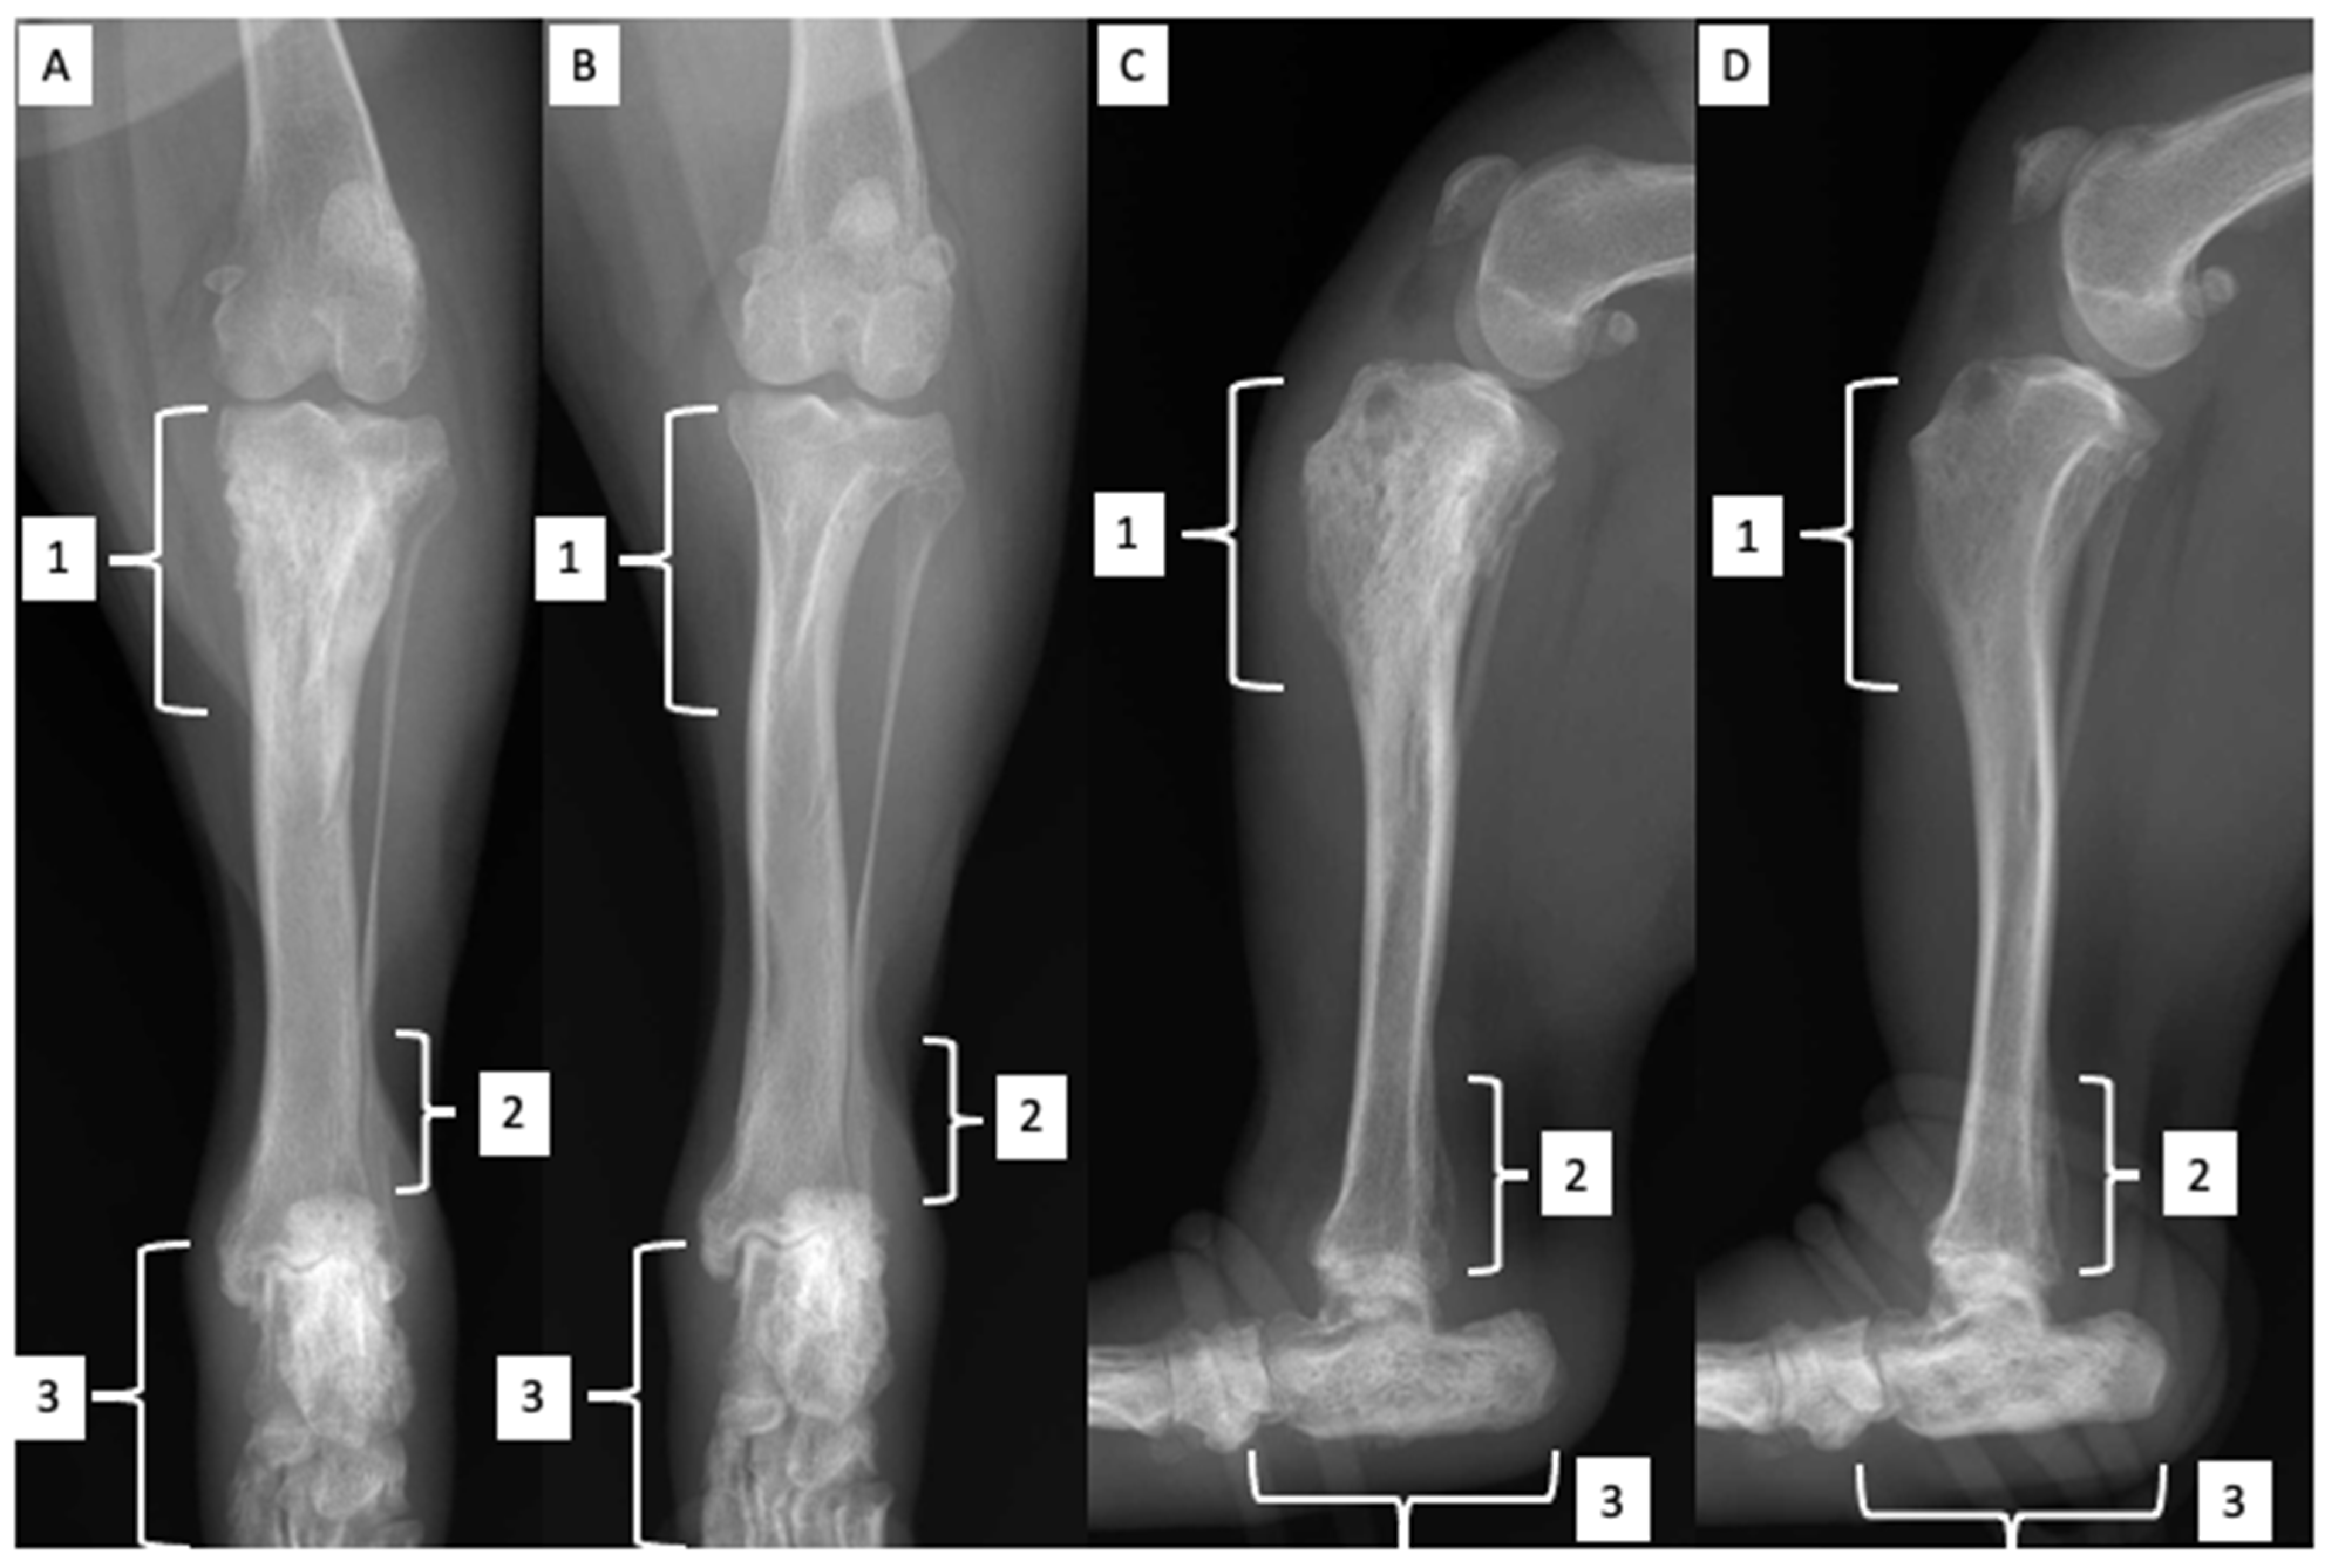 Zoonotic Diseases | Free Full-Text | Bone Lesions in a Young Dog and a NEEM (Azadirachta indica) Spray the Only Preventive Measure against Leishmaniasis: A Case Report